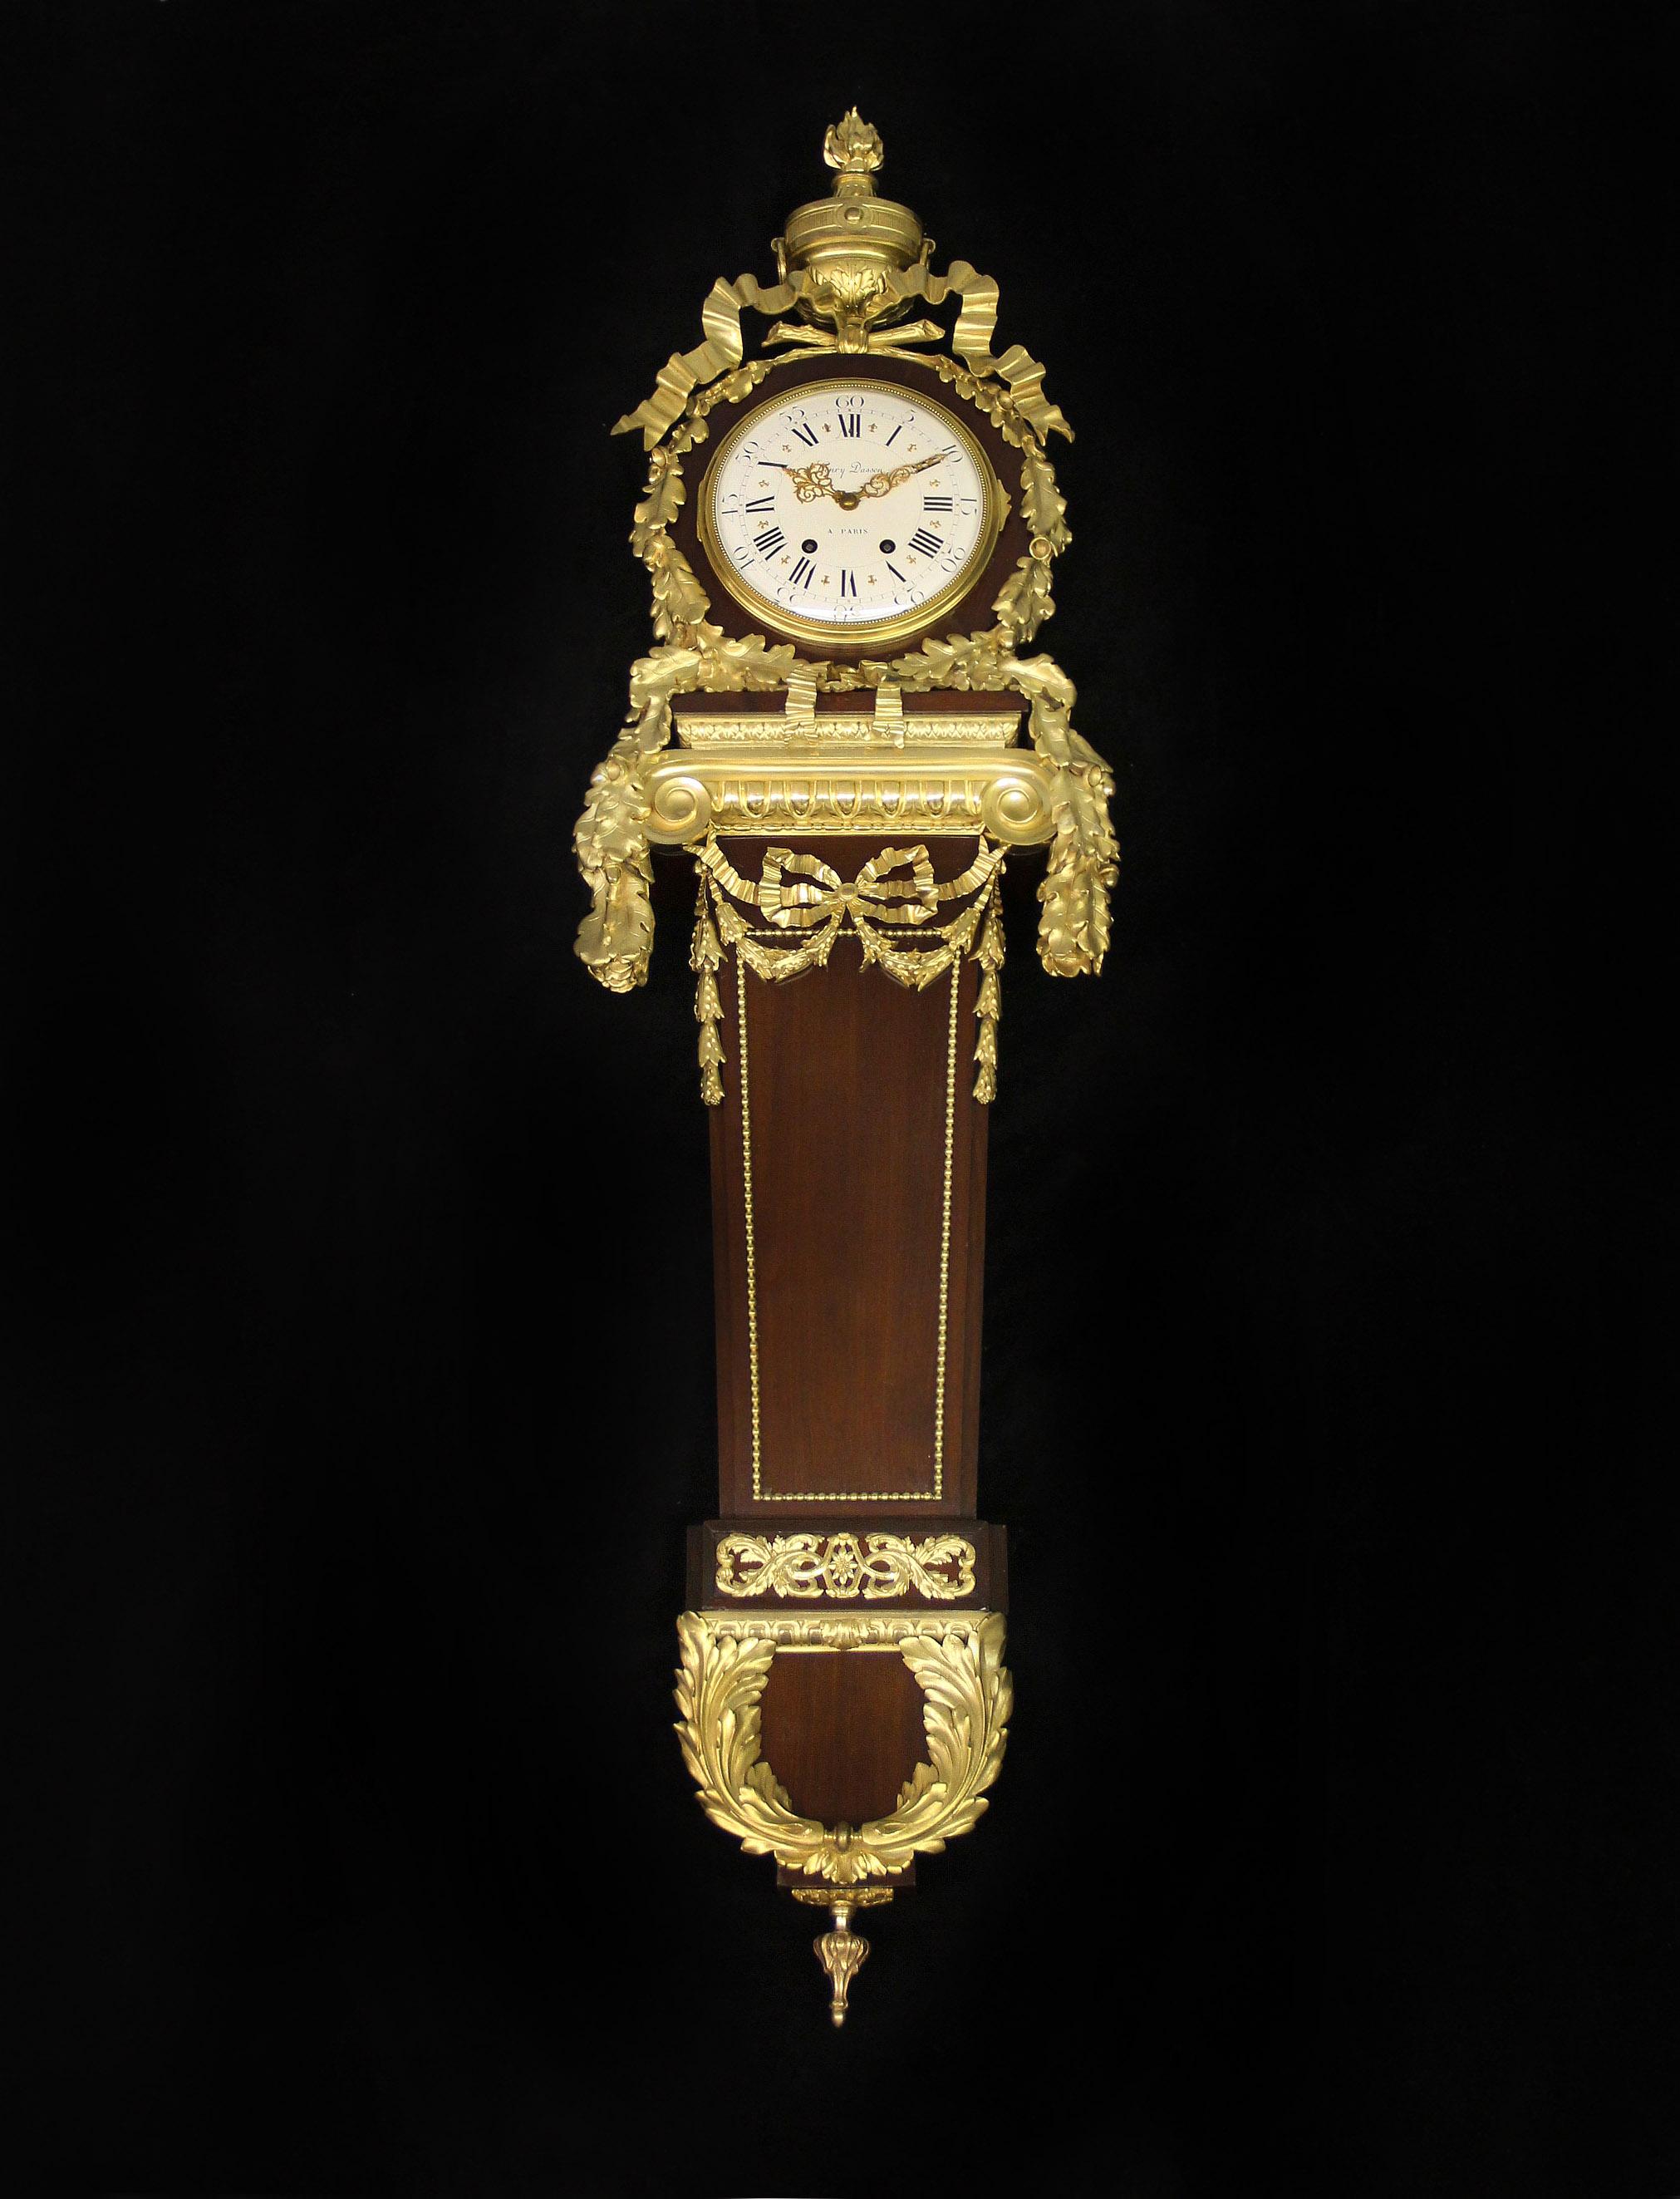 A Beautiful Late 19th Century Gilt Bronze Mounted Cartel Clock By Henry Dasson

Henry Dasson – After Martin Carlin

This large and fine cartel clock with a white enamel dial festooned with gilt bronze trailing oak leaves and surmounted by a